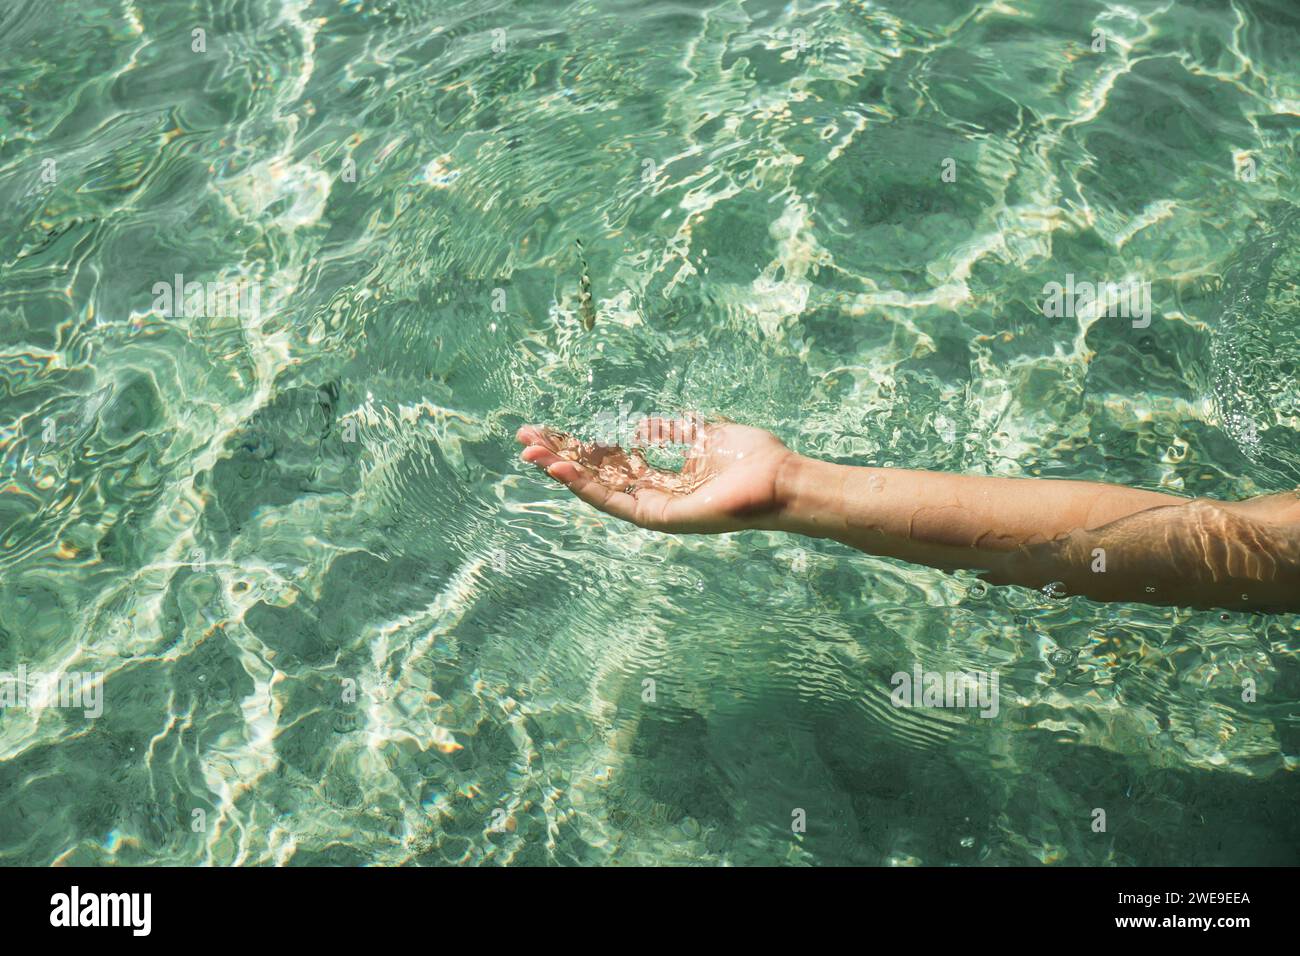 Hands with pure water. Closeup of a woman's hand touching the lake water. A person's hand reaching out to touch a rippling water surface, exploring th Stock Photo